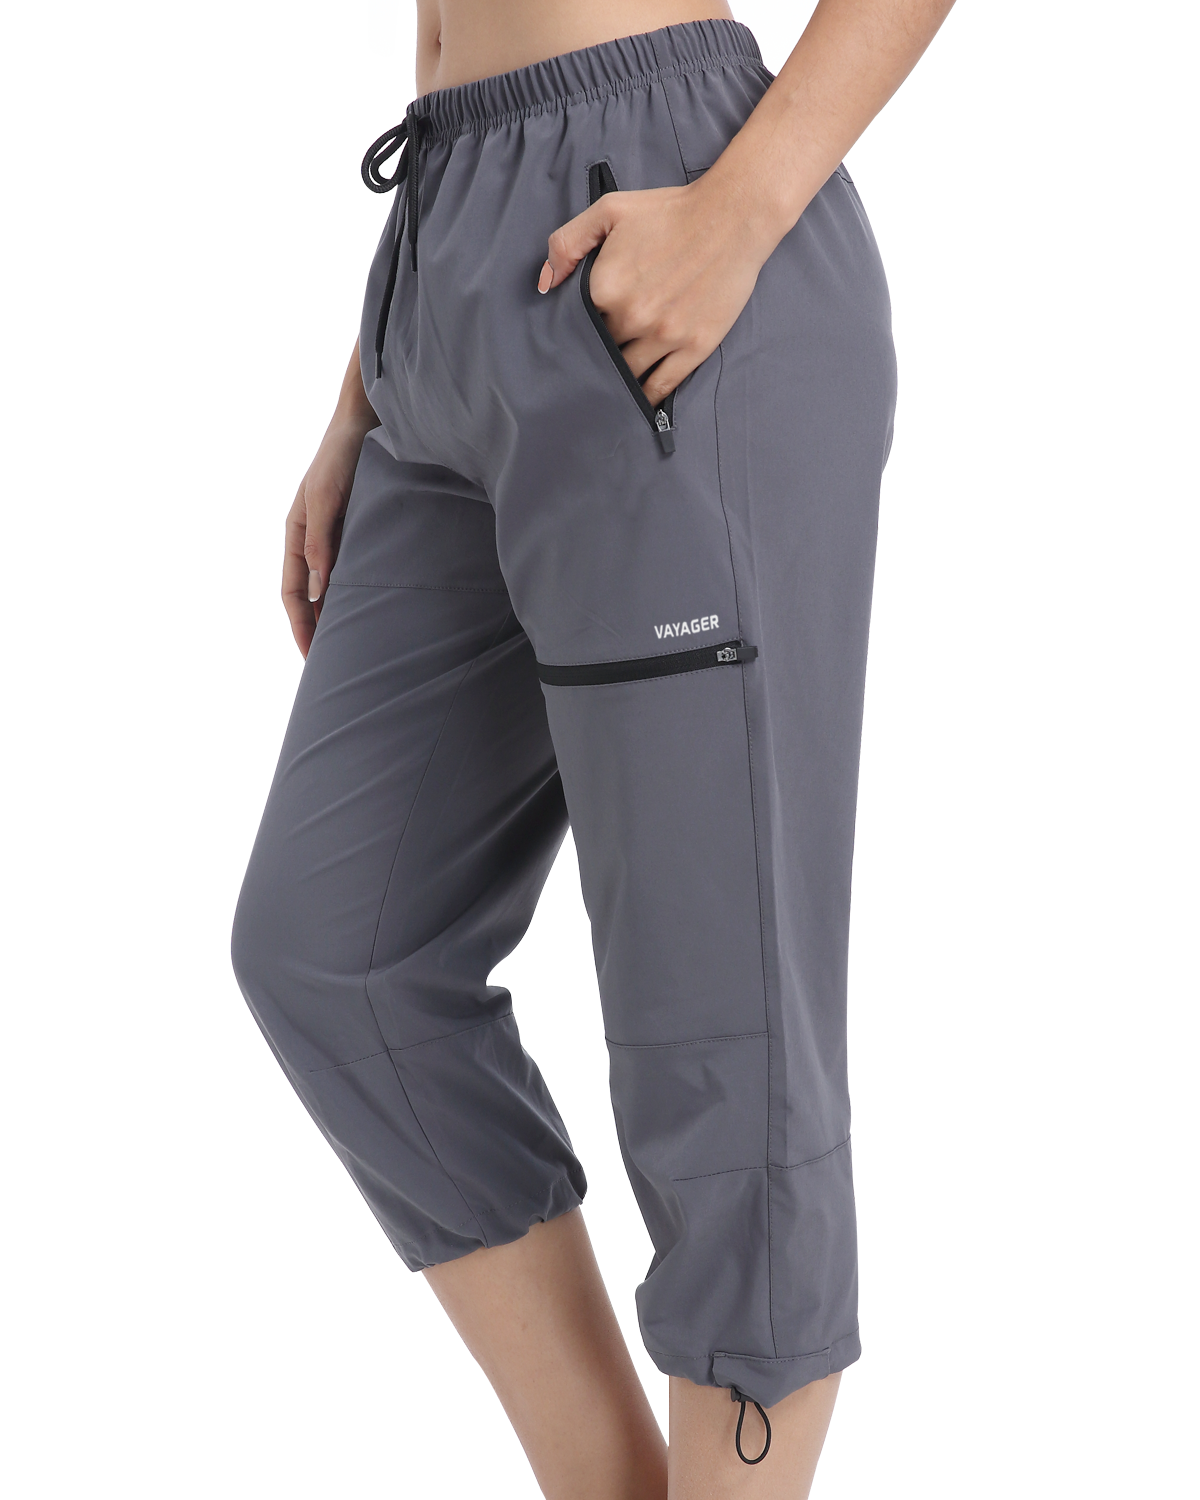 Women's Cargo Capris Hiking Pants Lightweight Quick Dry Elastic Waist  Outdoor Capris Summer Casual Loose Fit Capris with Pockets